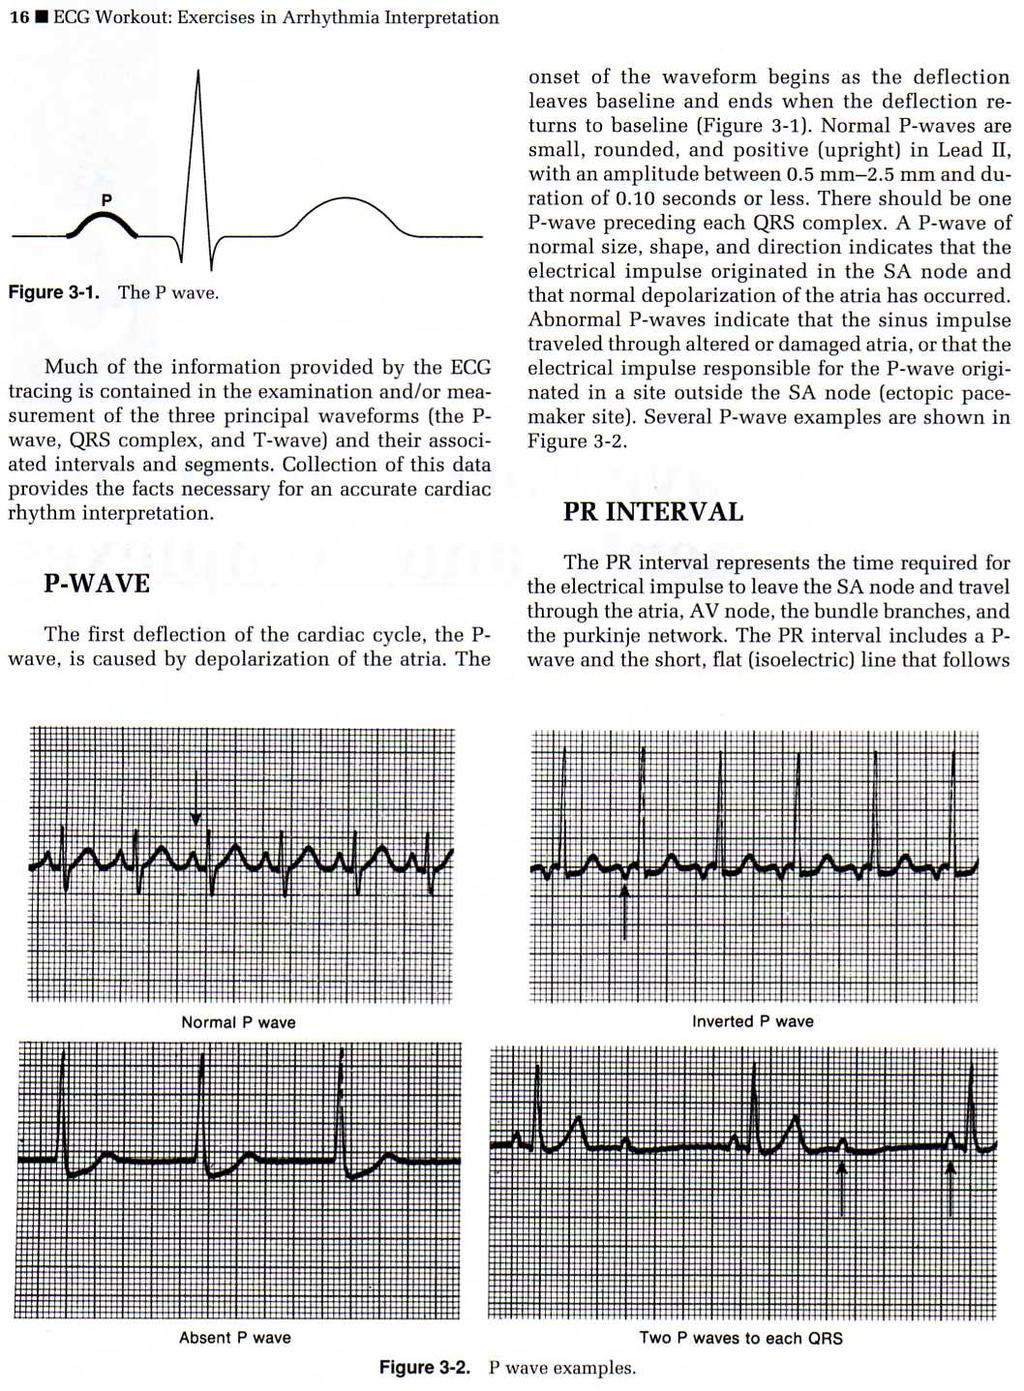 EKG Sign-in Book HTEC 91 Review of protocol Review of placement of chest leads (V1, V2) Medical Office Diagnostic Tests Week 2 http://www.cvphysiology.com/arrhythmias/a013c.